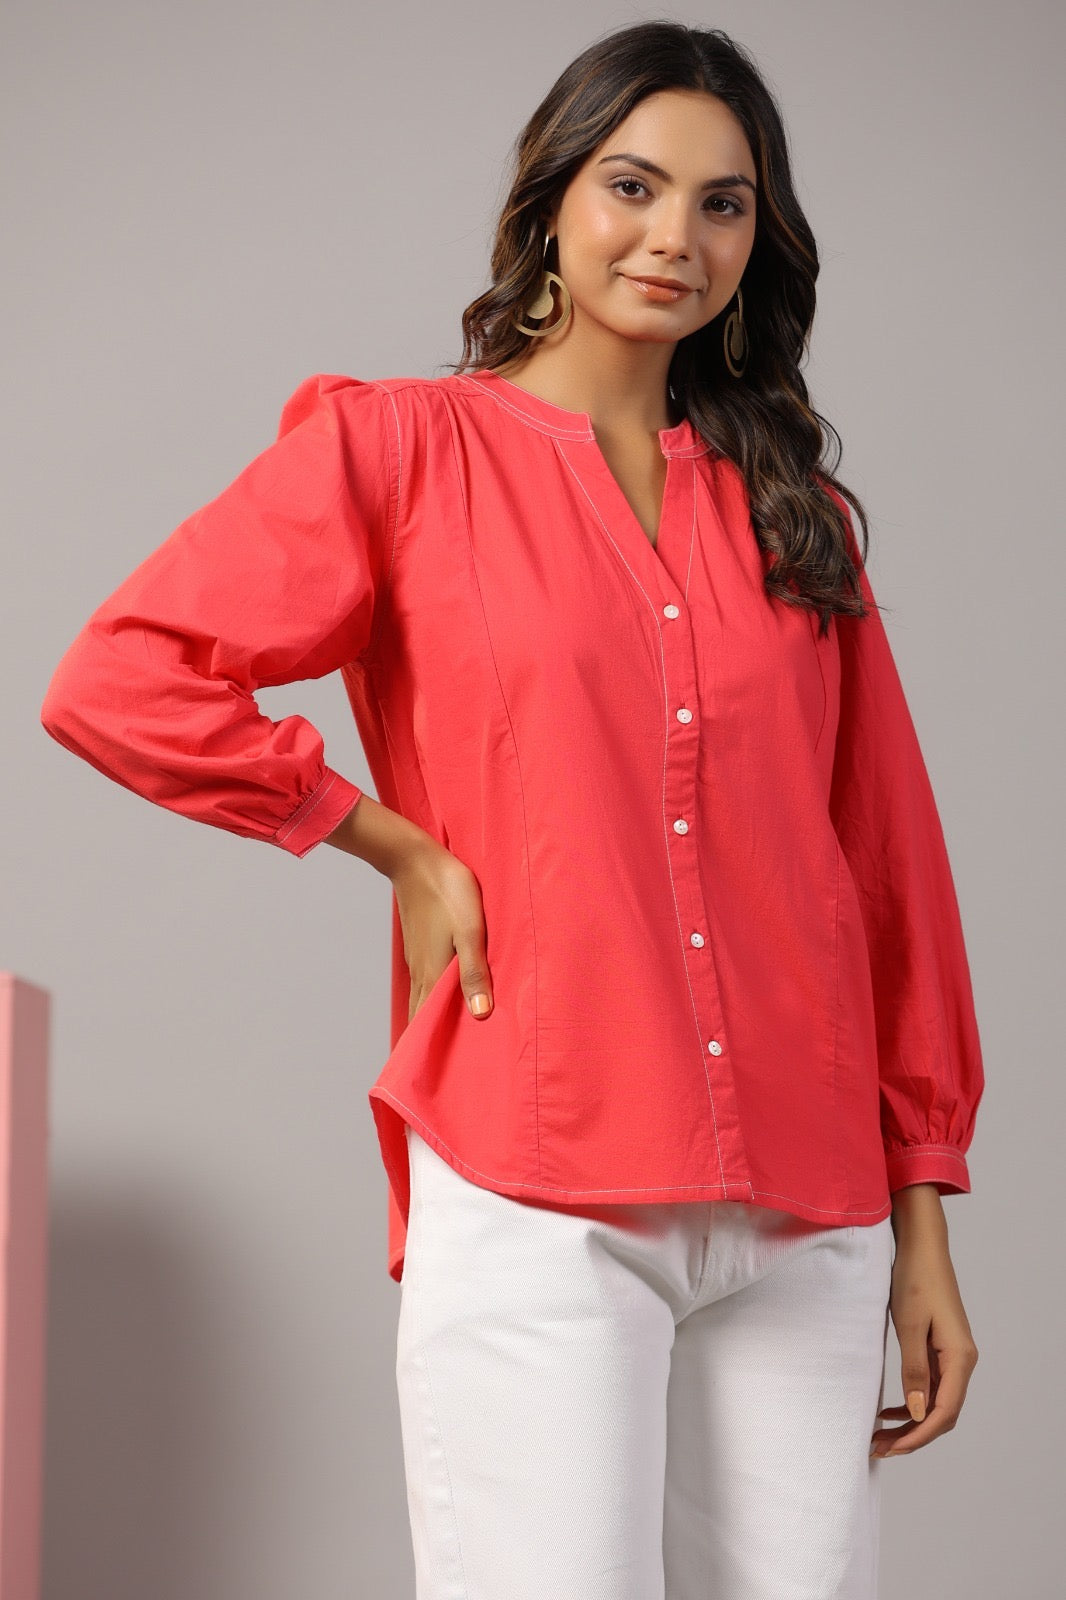 Coral Red Color Top